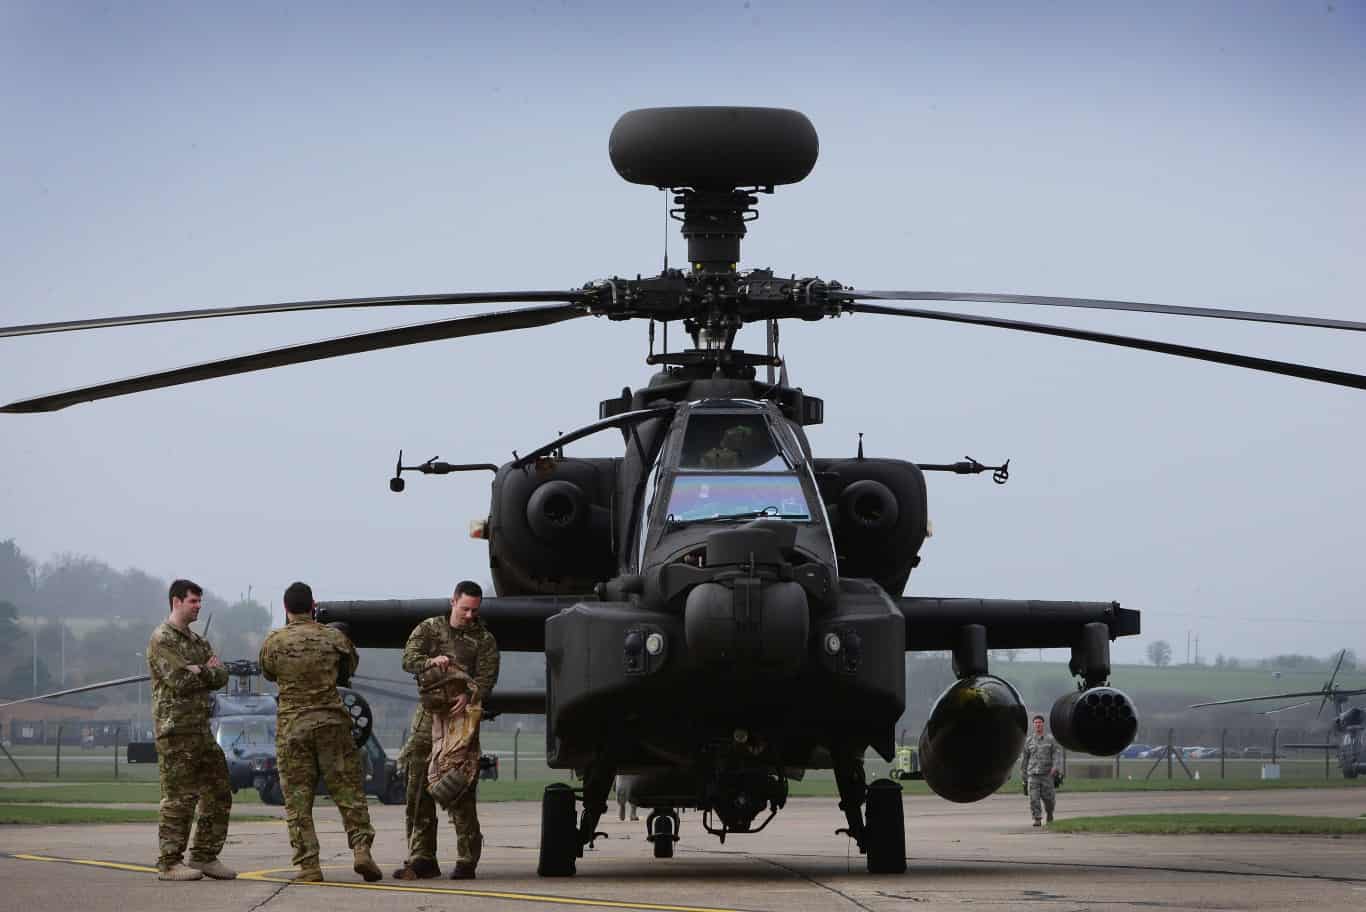 United+Kingdom+apache+helicopter | 180410-F-QP712-0553